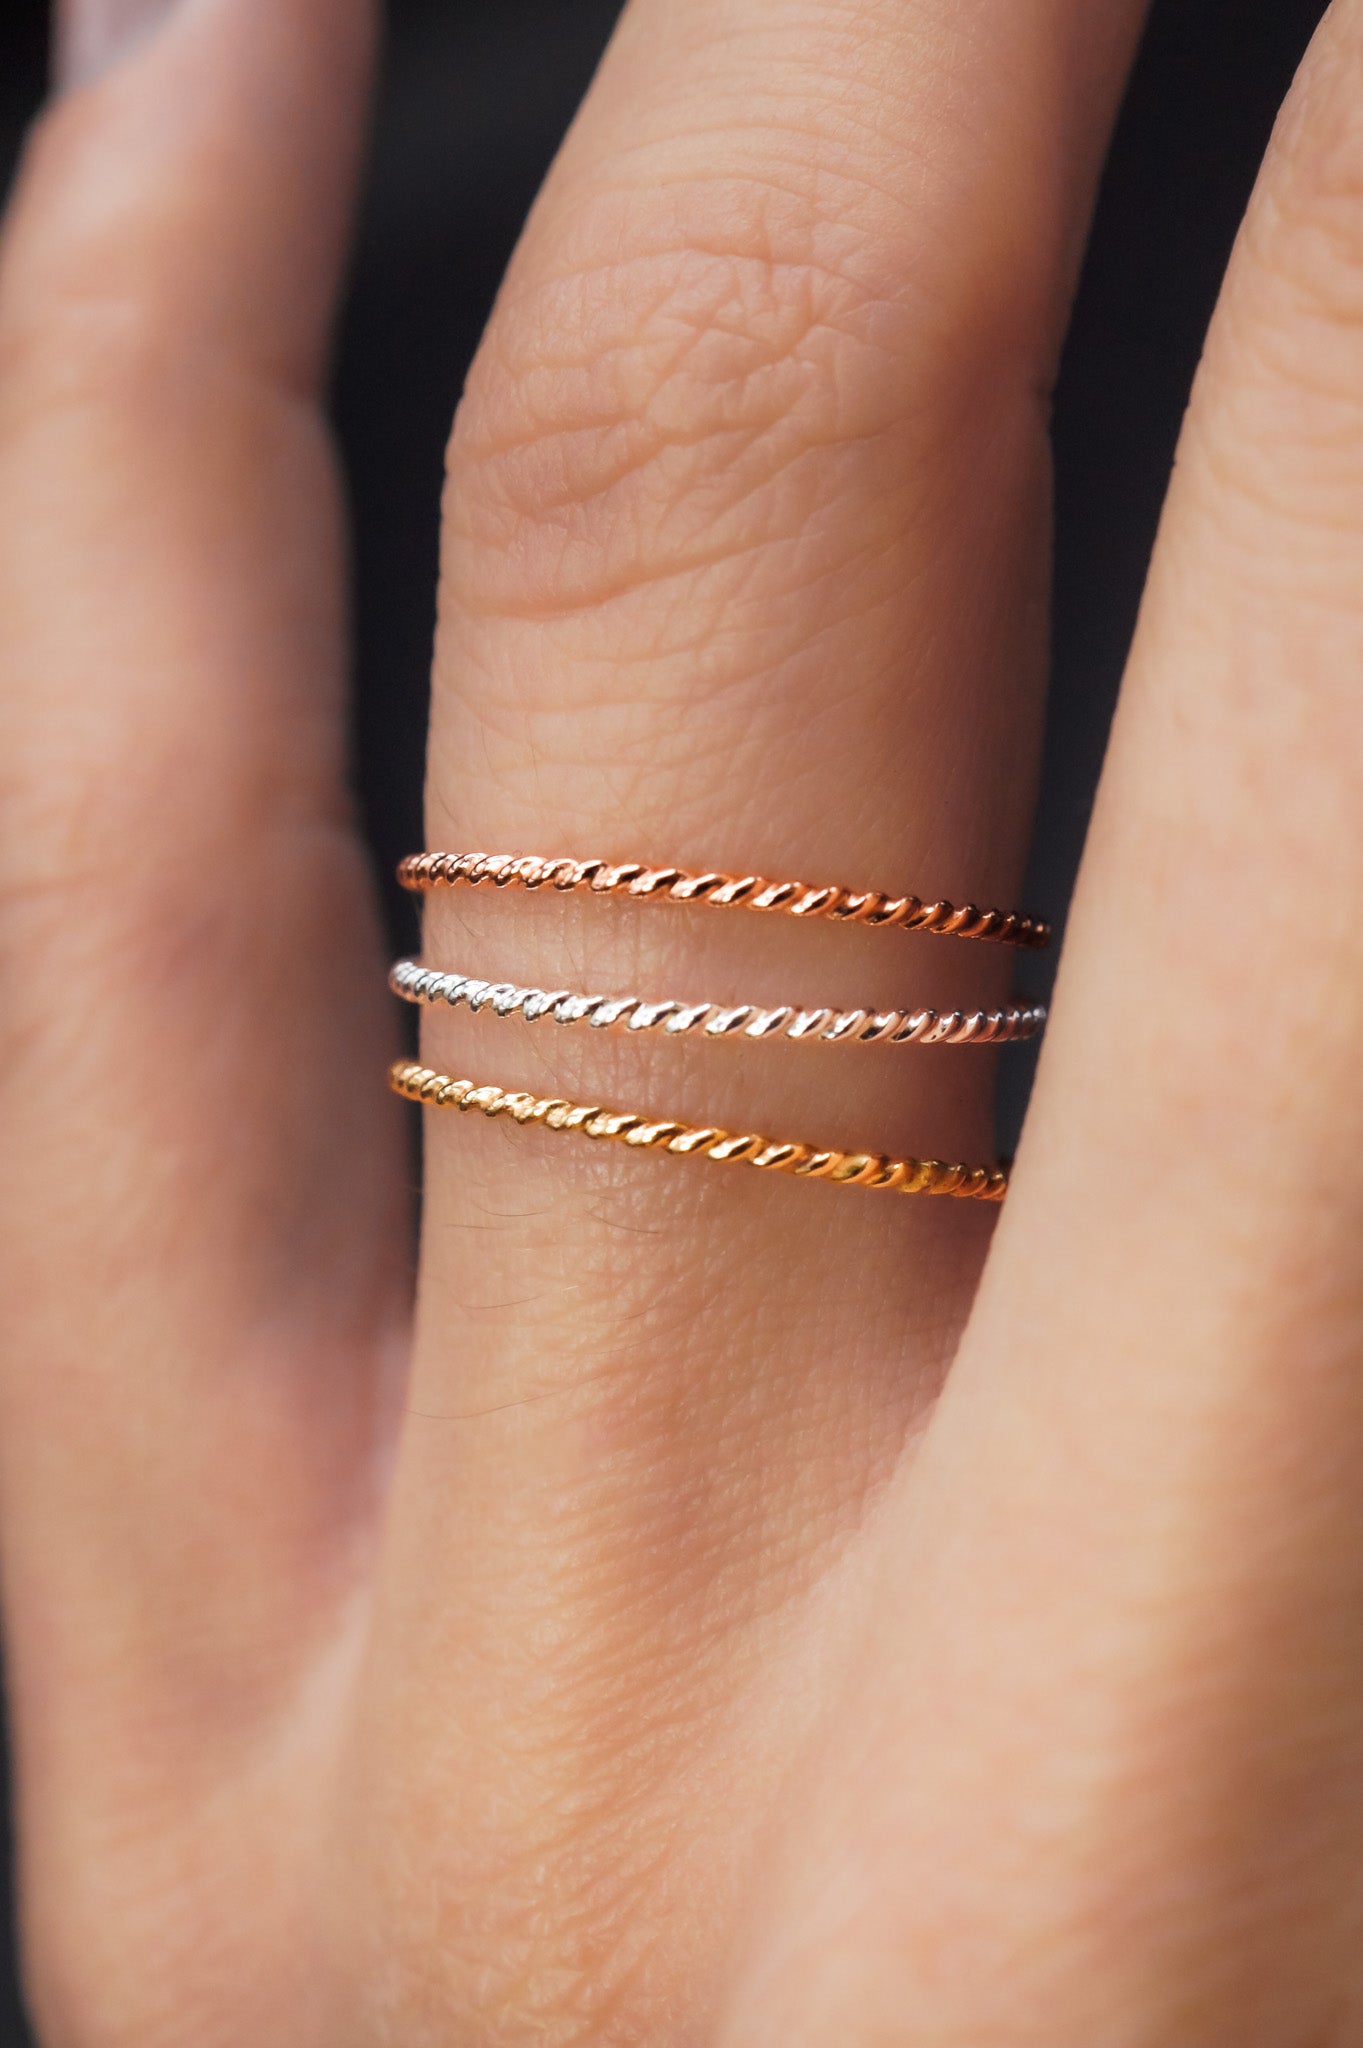 Buy Twist Ring, Gold Fill or Sterling Silver, Gold Twisted Ring,  Minimalistic Ring, Stackable Ring, Simple Gold Ring, Chunky Ring, Pinky Ring  Online in India - Etsy